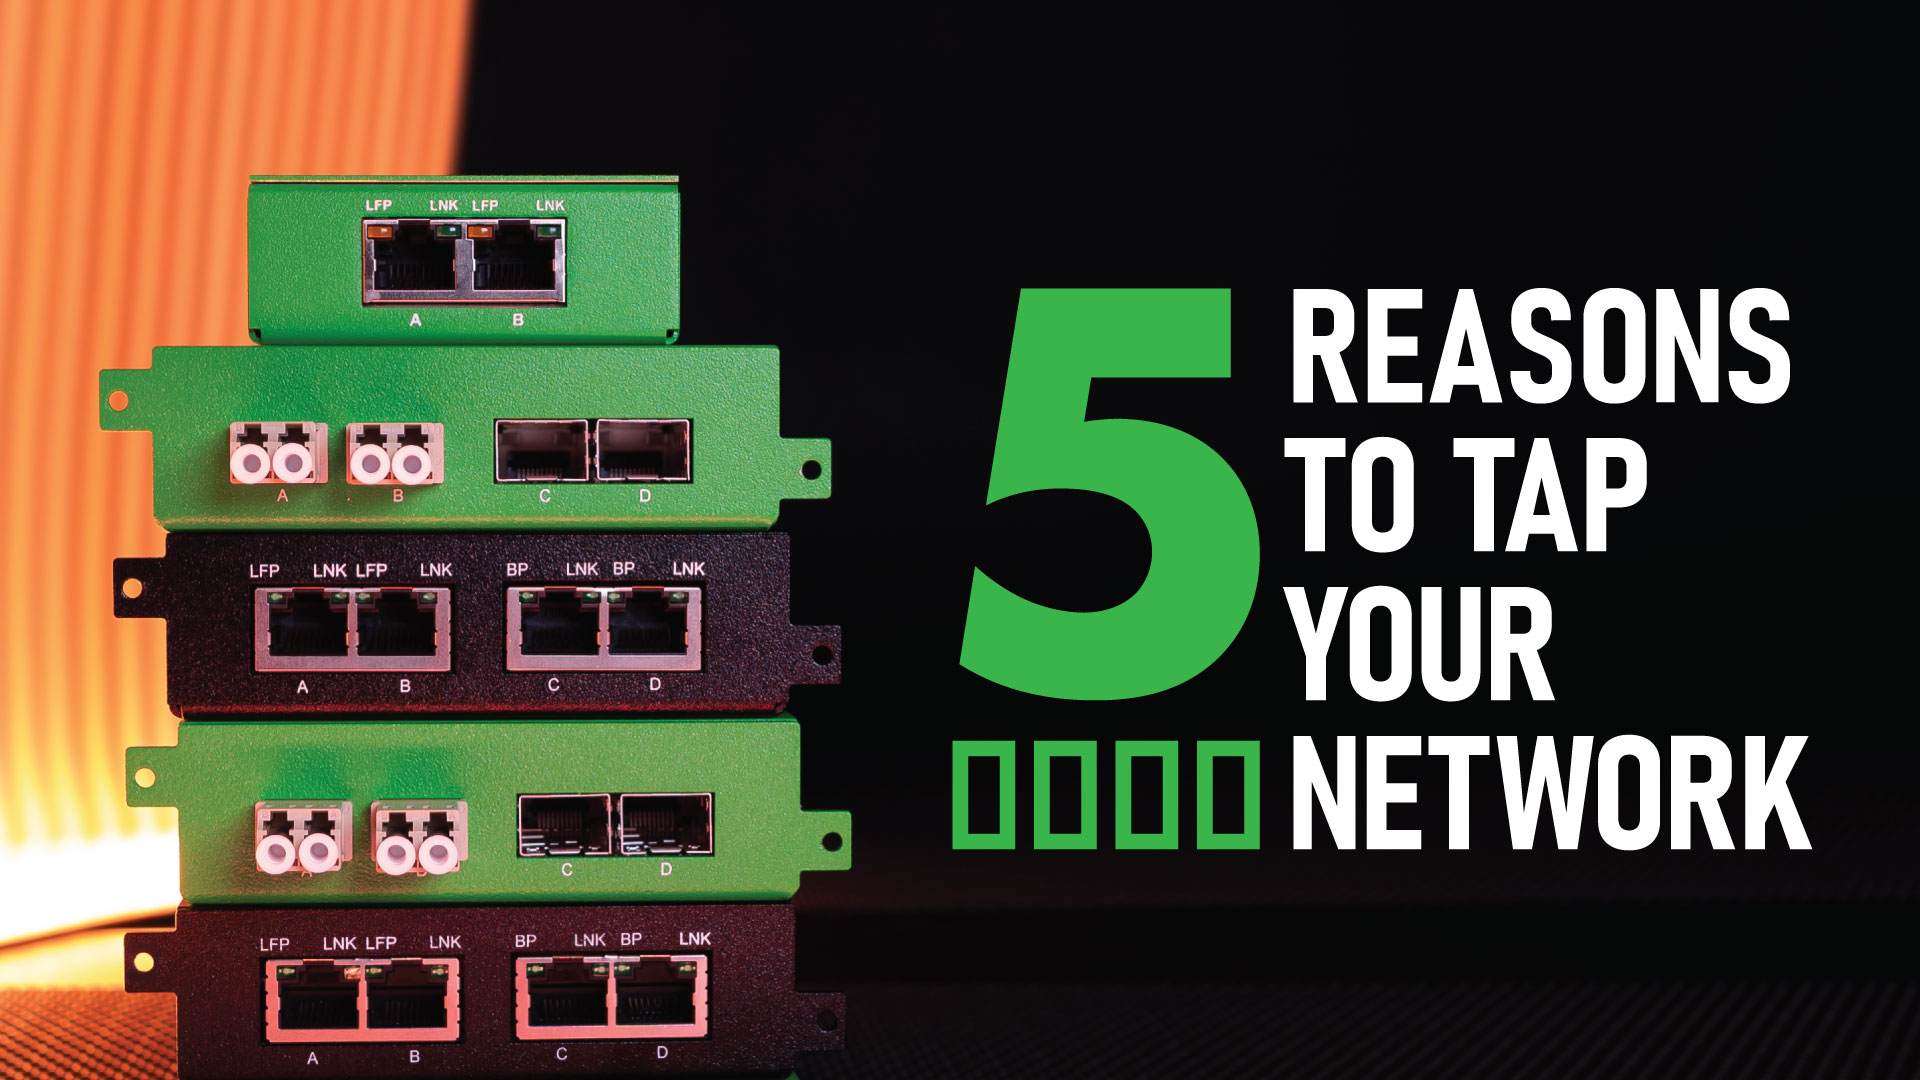 5 Reasons to TAP your Network